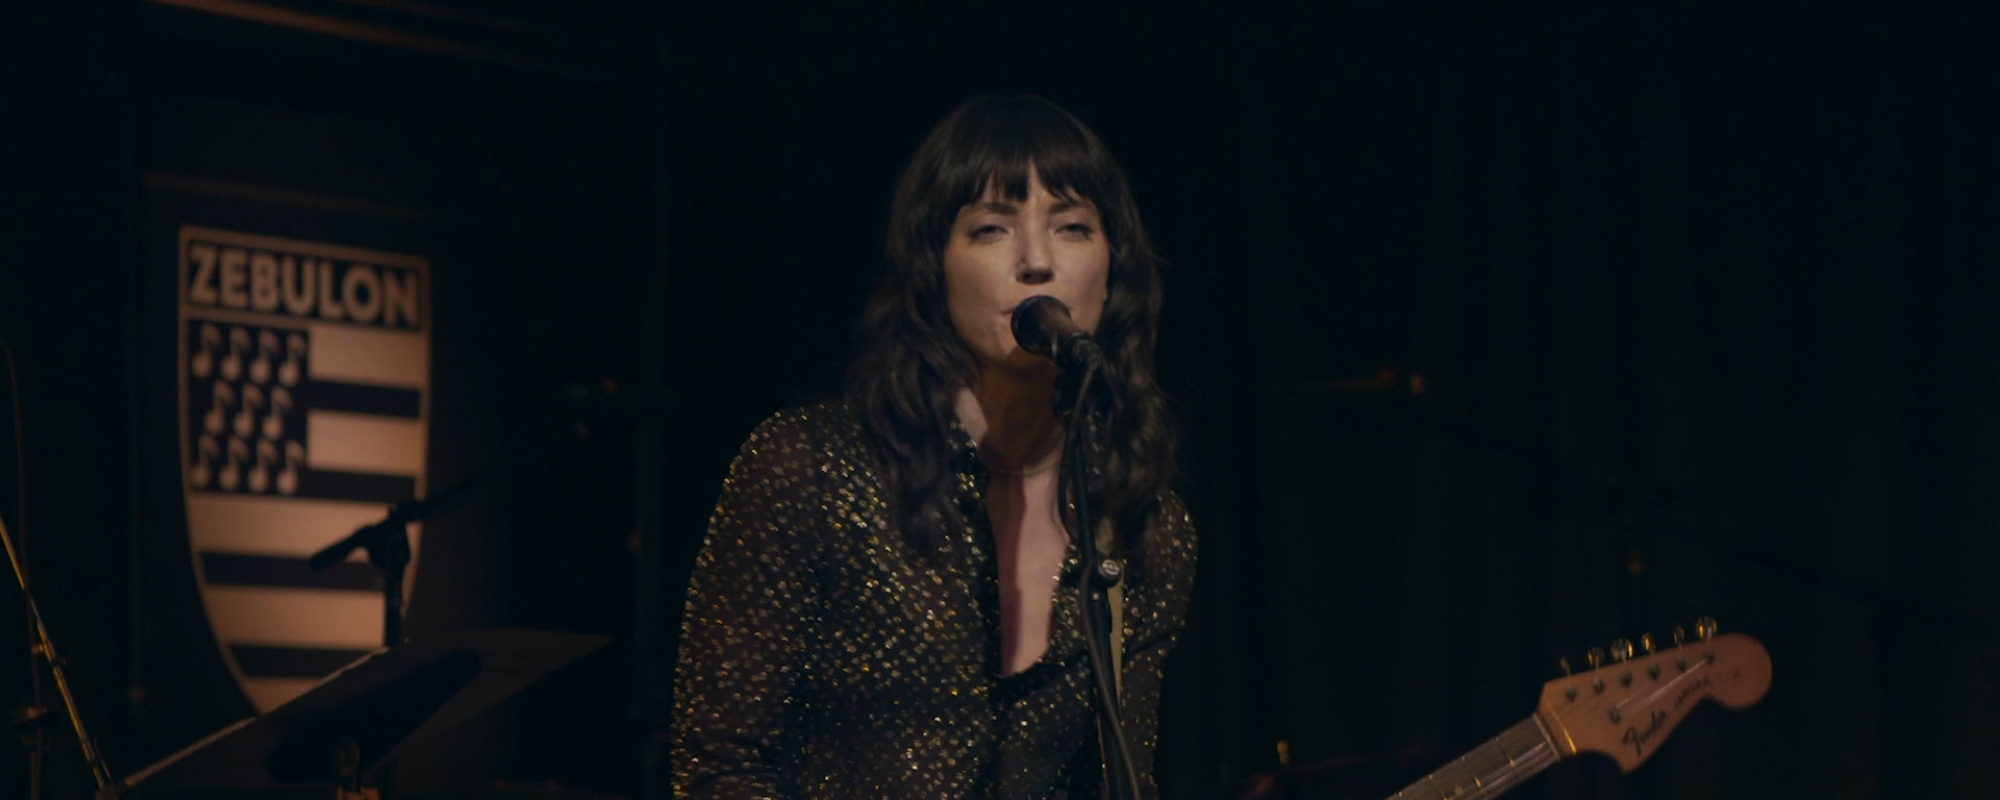 New Song Friday! Hear New Tracks from Sharon Van Etten, Jack White, Camila Cabello, and More!